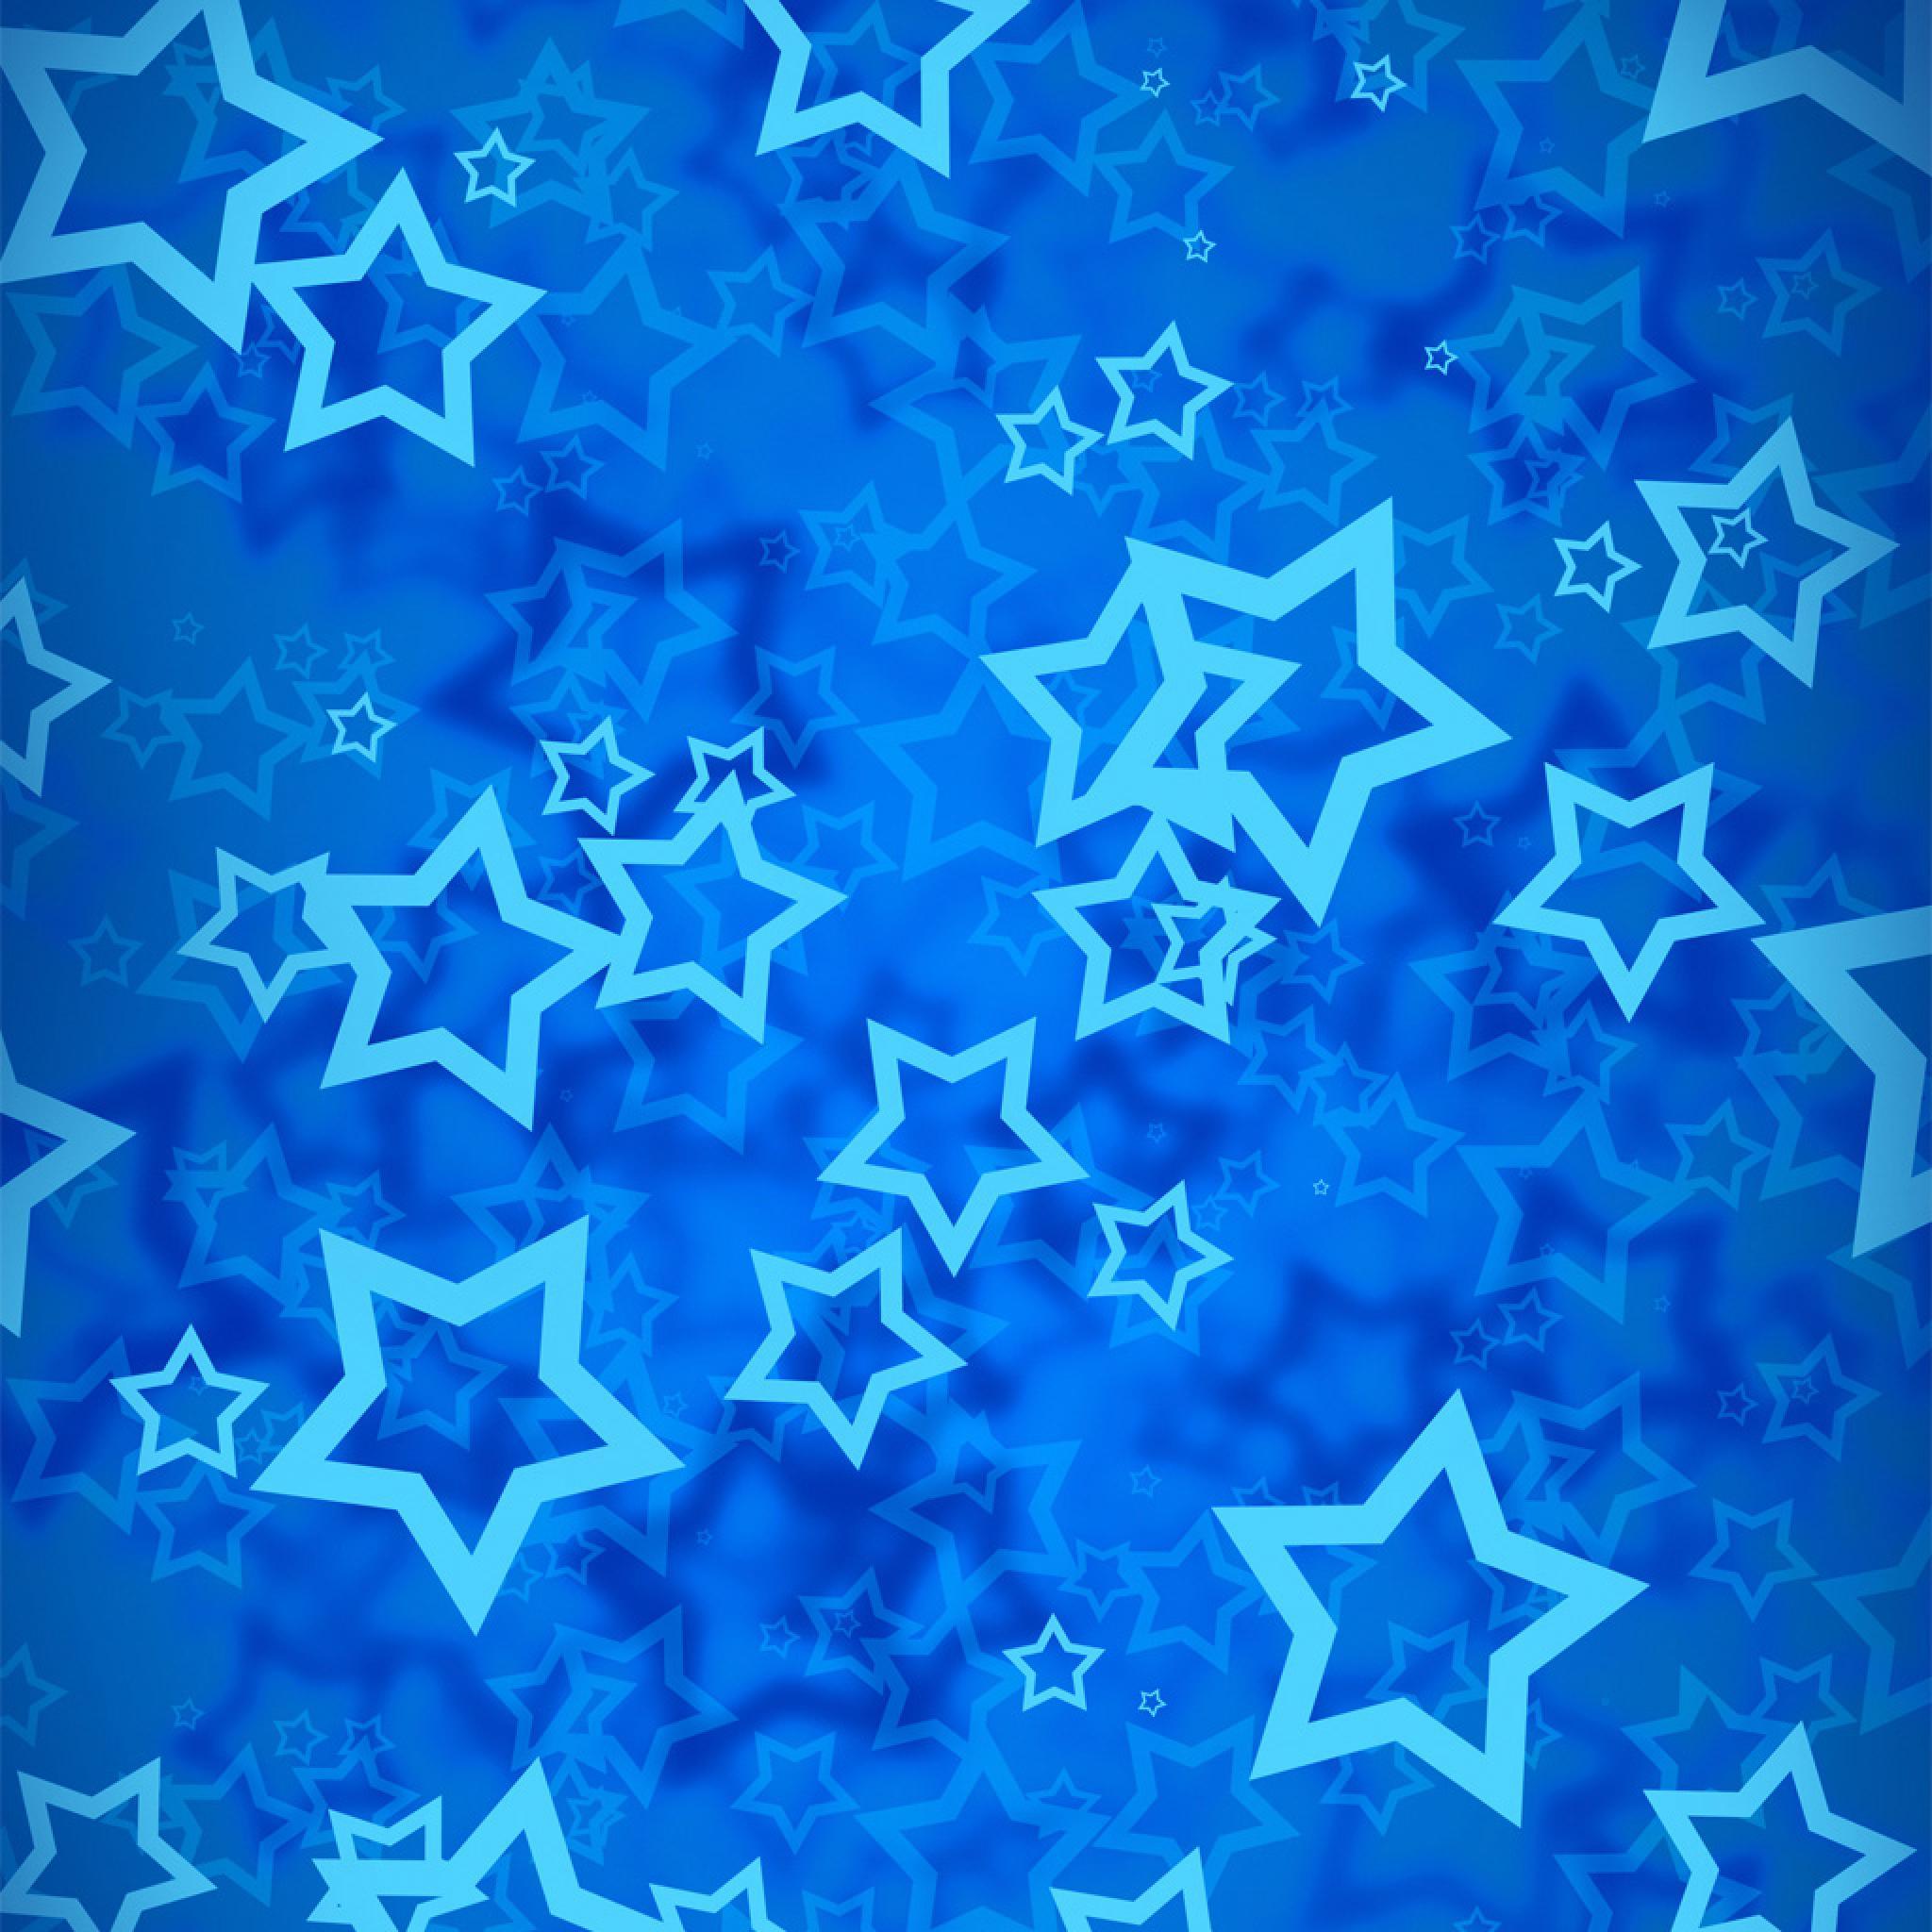 Wallpaper Blue and White Starry Night Sky, Background - Download Free Image